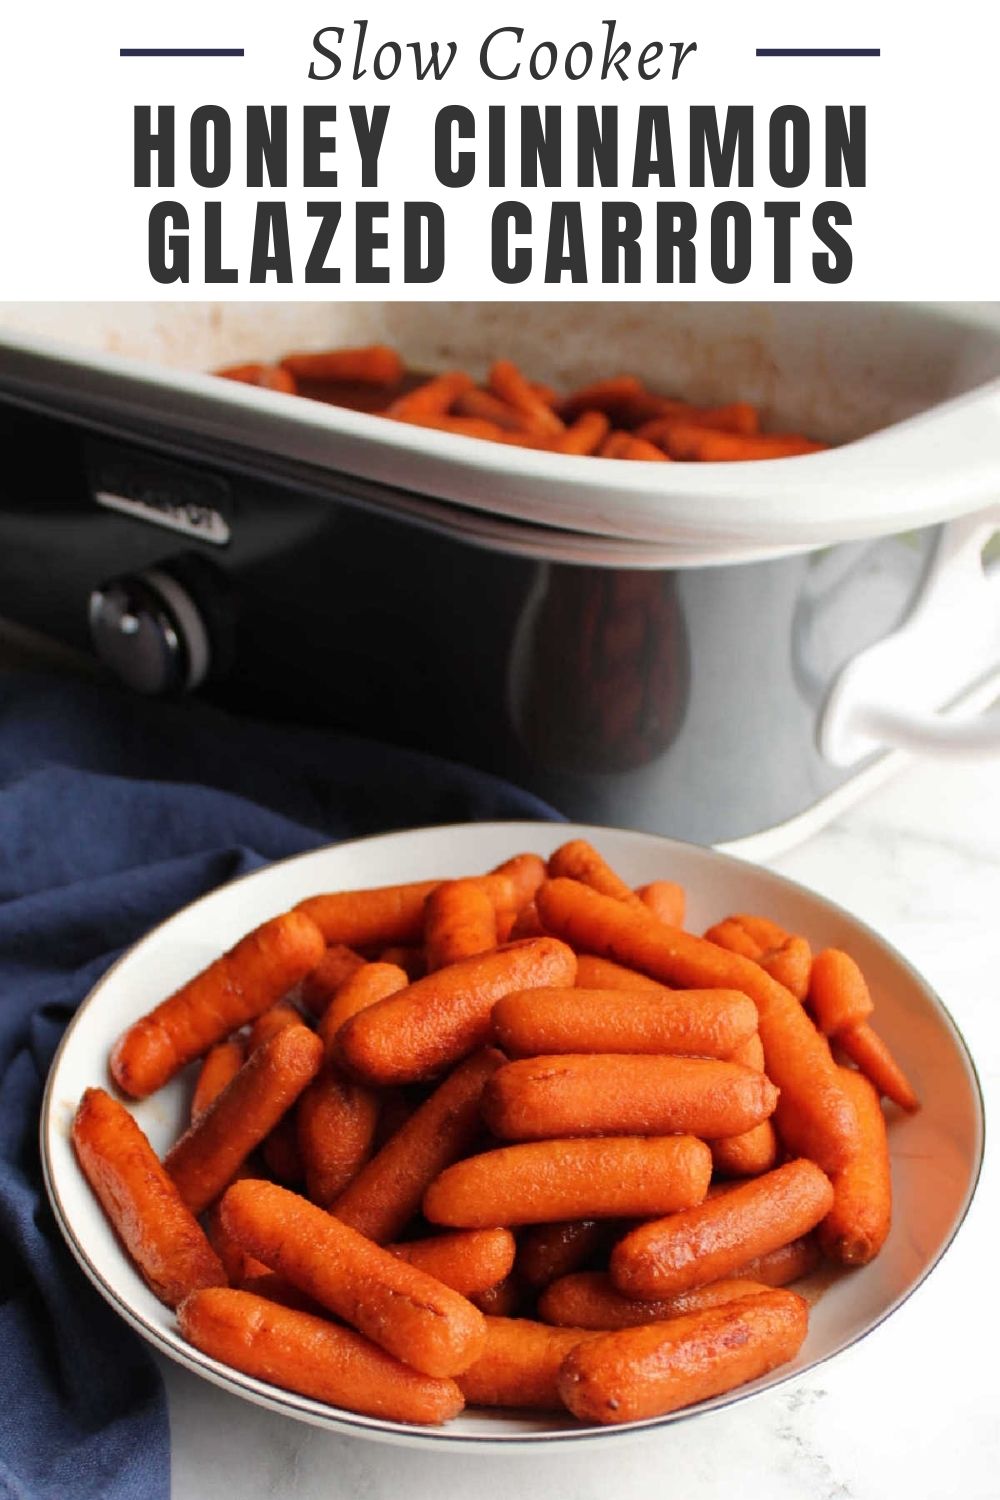 Slow cooker honey glazed carrots are a perfectly easy side dish. They have a hint of cinnamon and a touch of honey making them extra delicious.